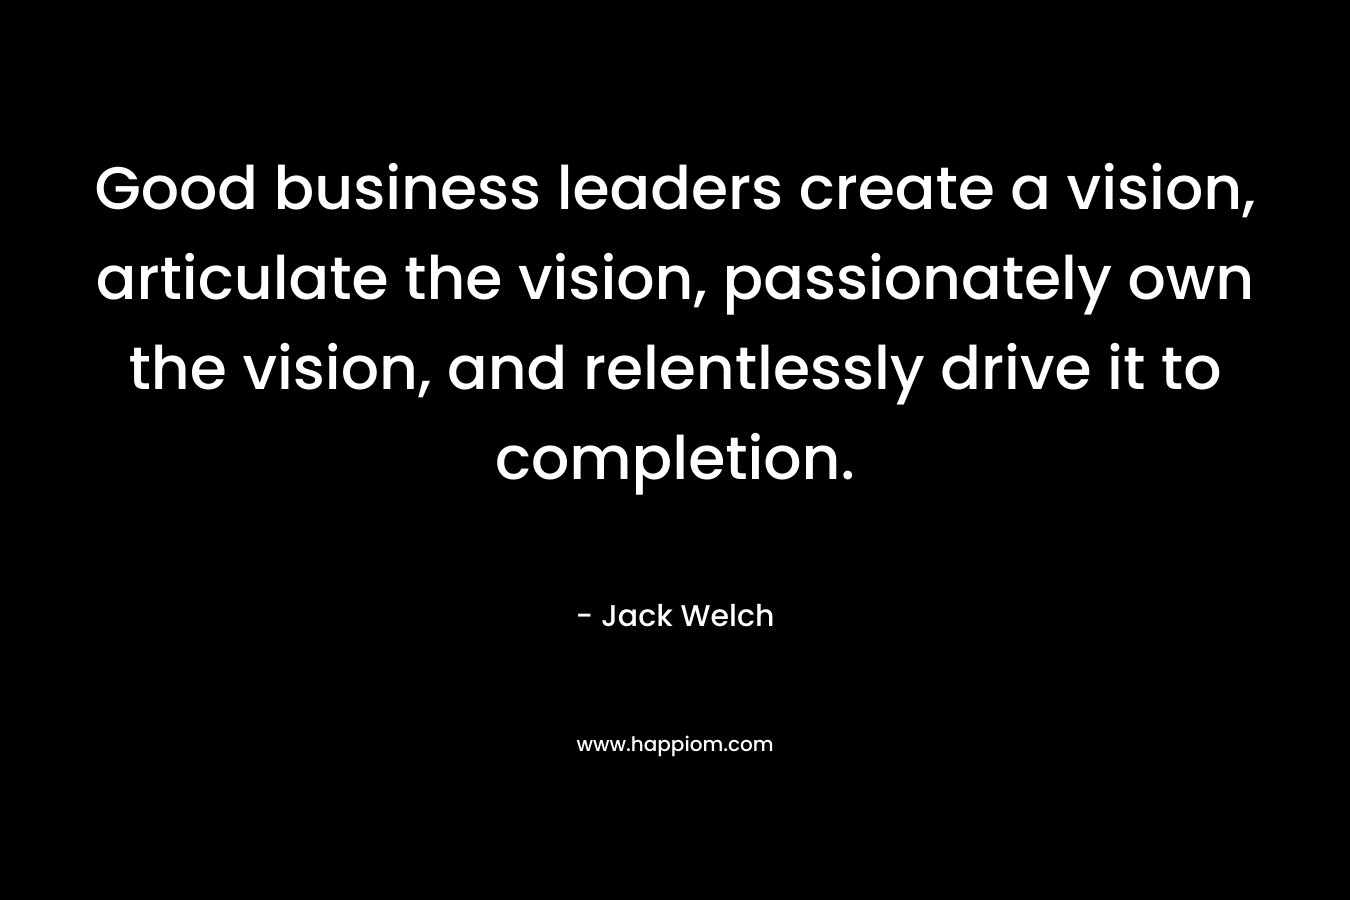 Good business leaders create a vision, articulate the vision, passionately own the vision, and relentlessly drive it to completion.